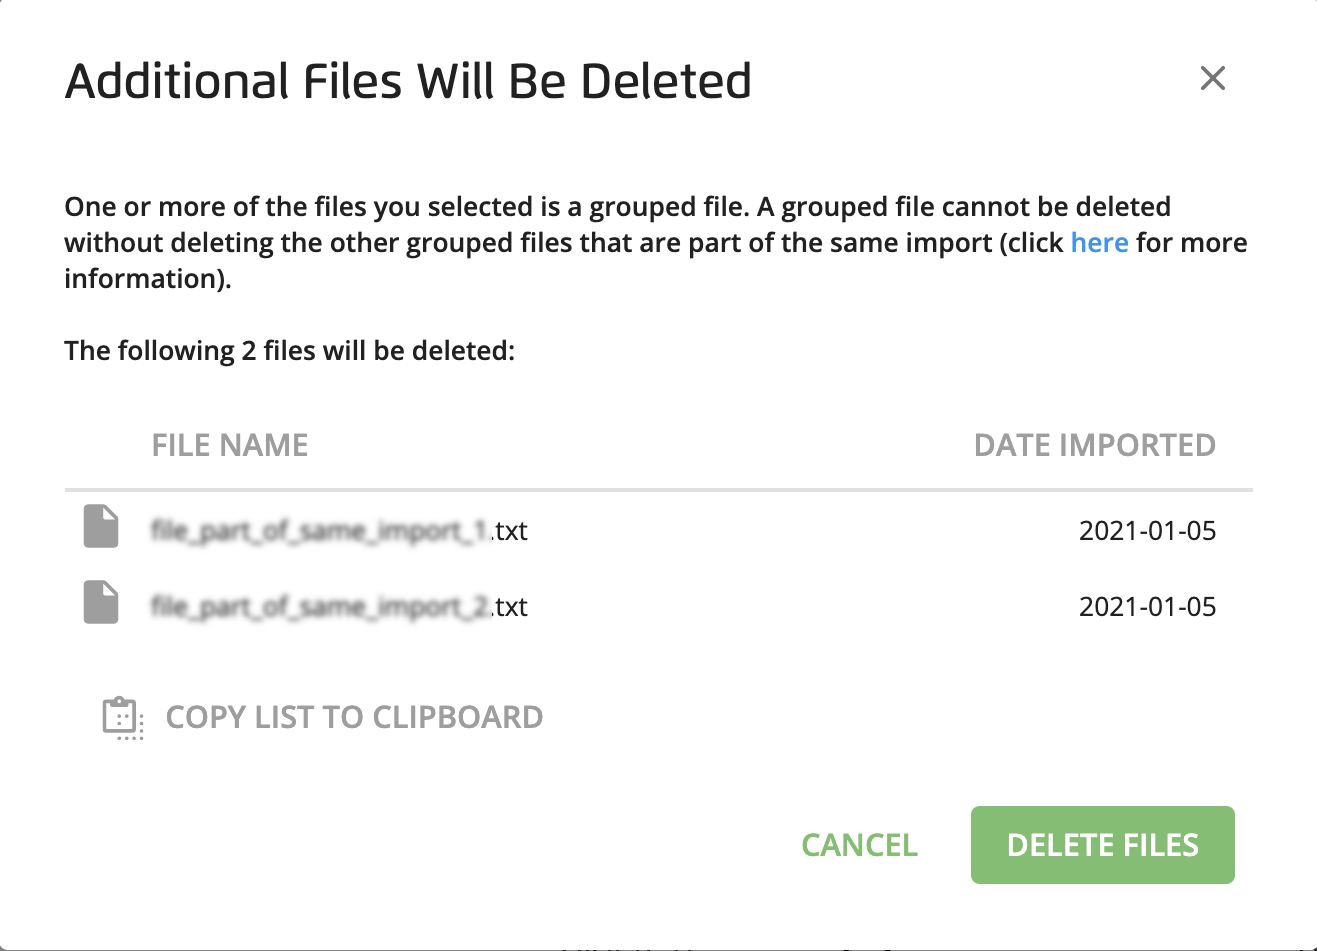 C-Delete_File_From_Audience-grouped_file_deletion_confirmation.jpg